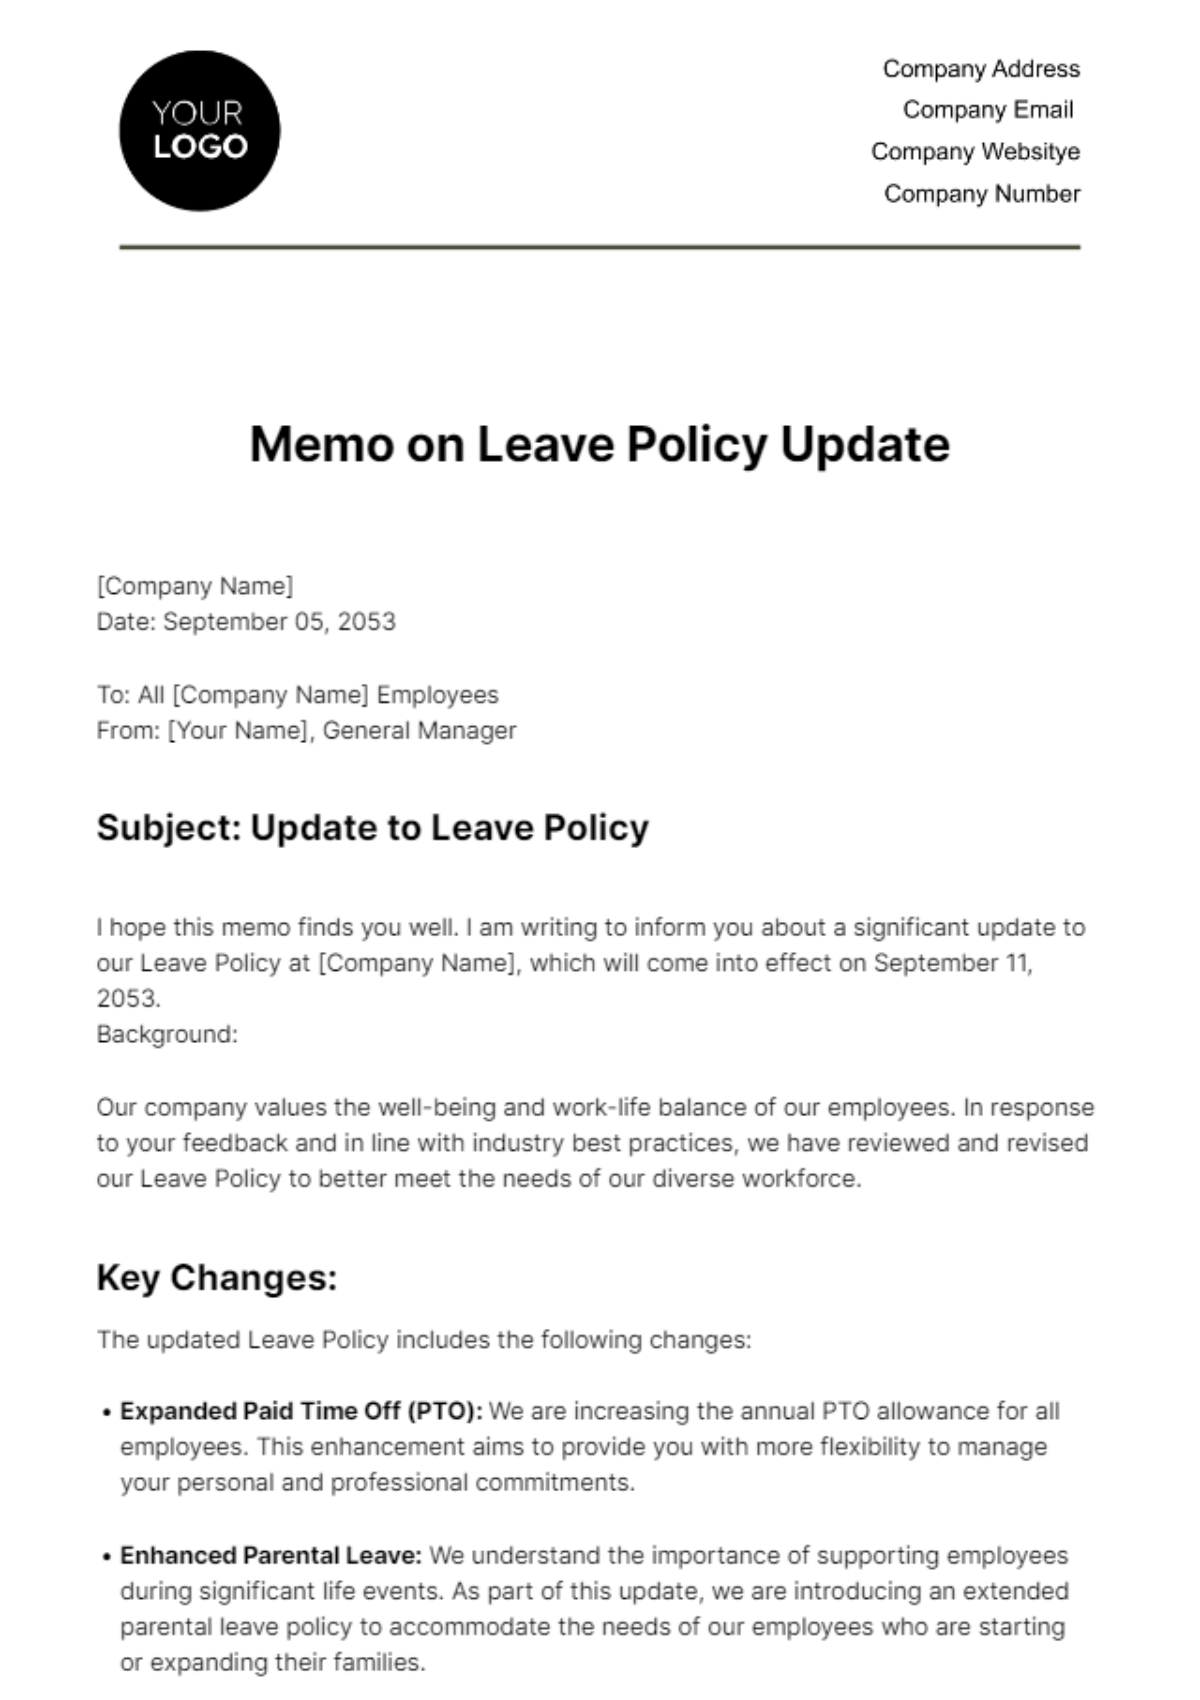 Free Memo on Leave Policy Update HR Template